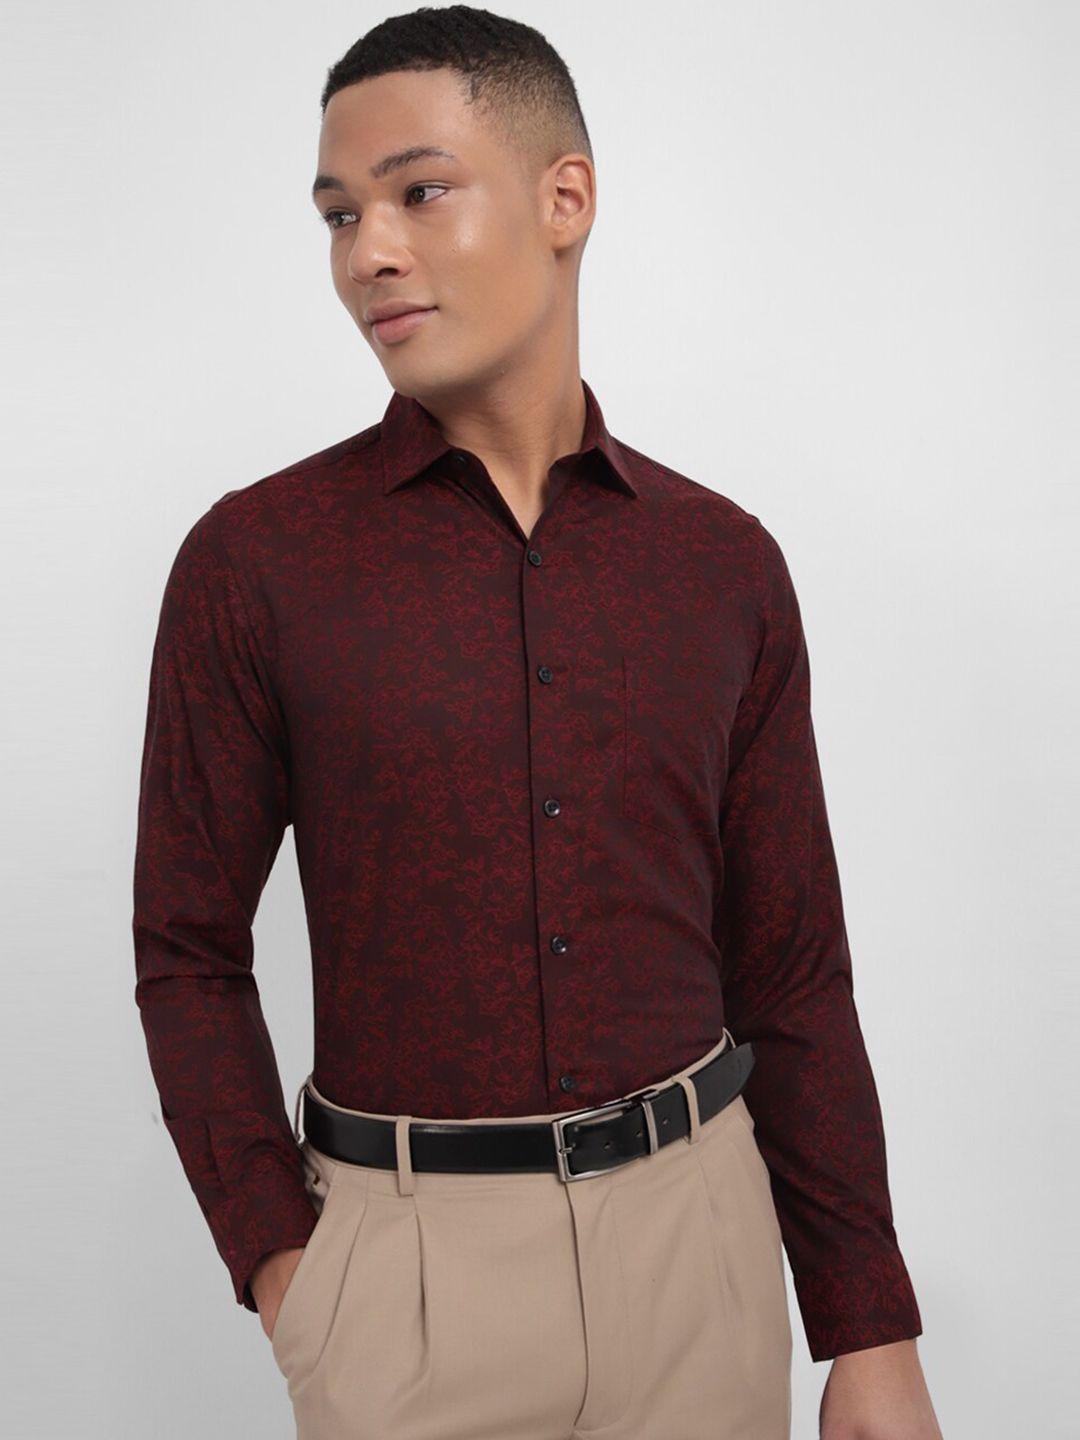 allen-solly-slim-fit-floral-printed-spread-collar-pure-cotton-formal-shirt